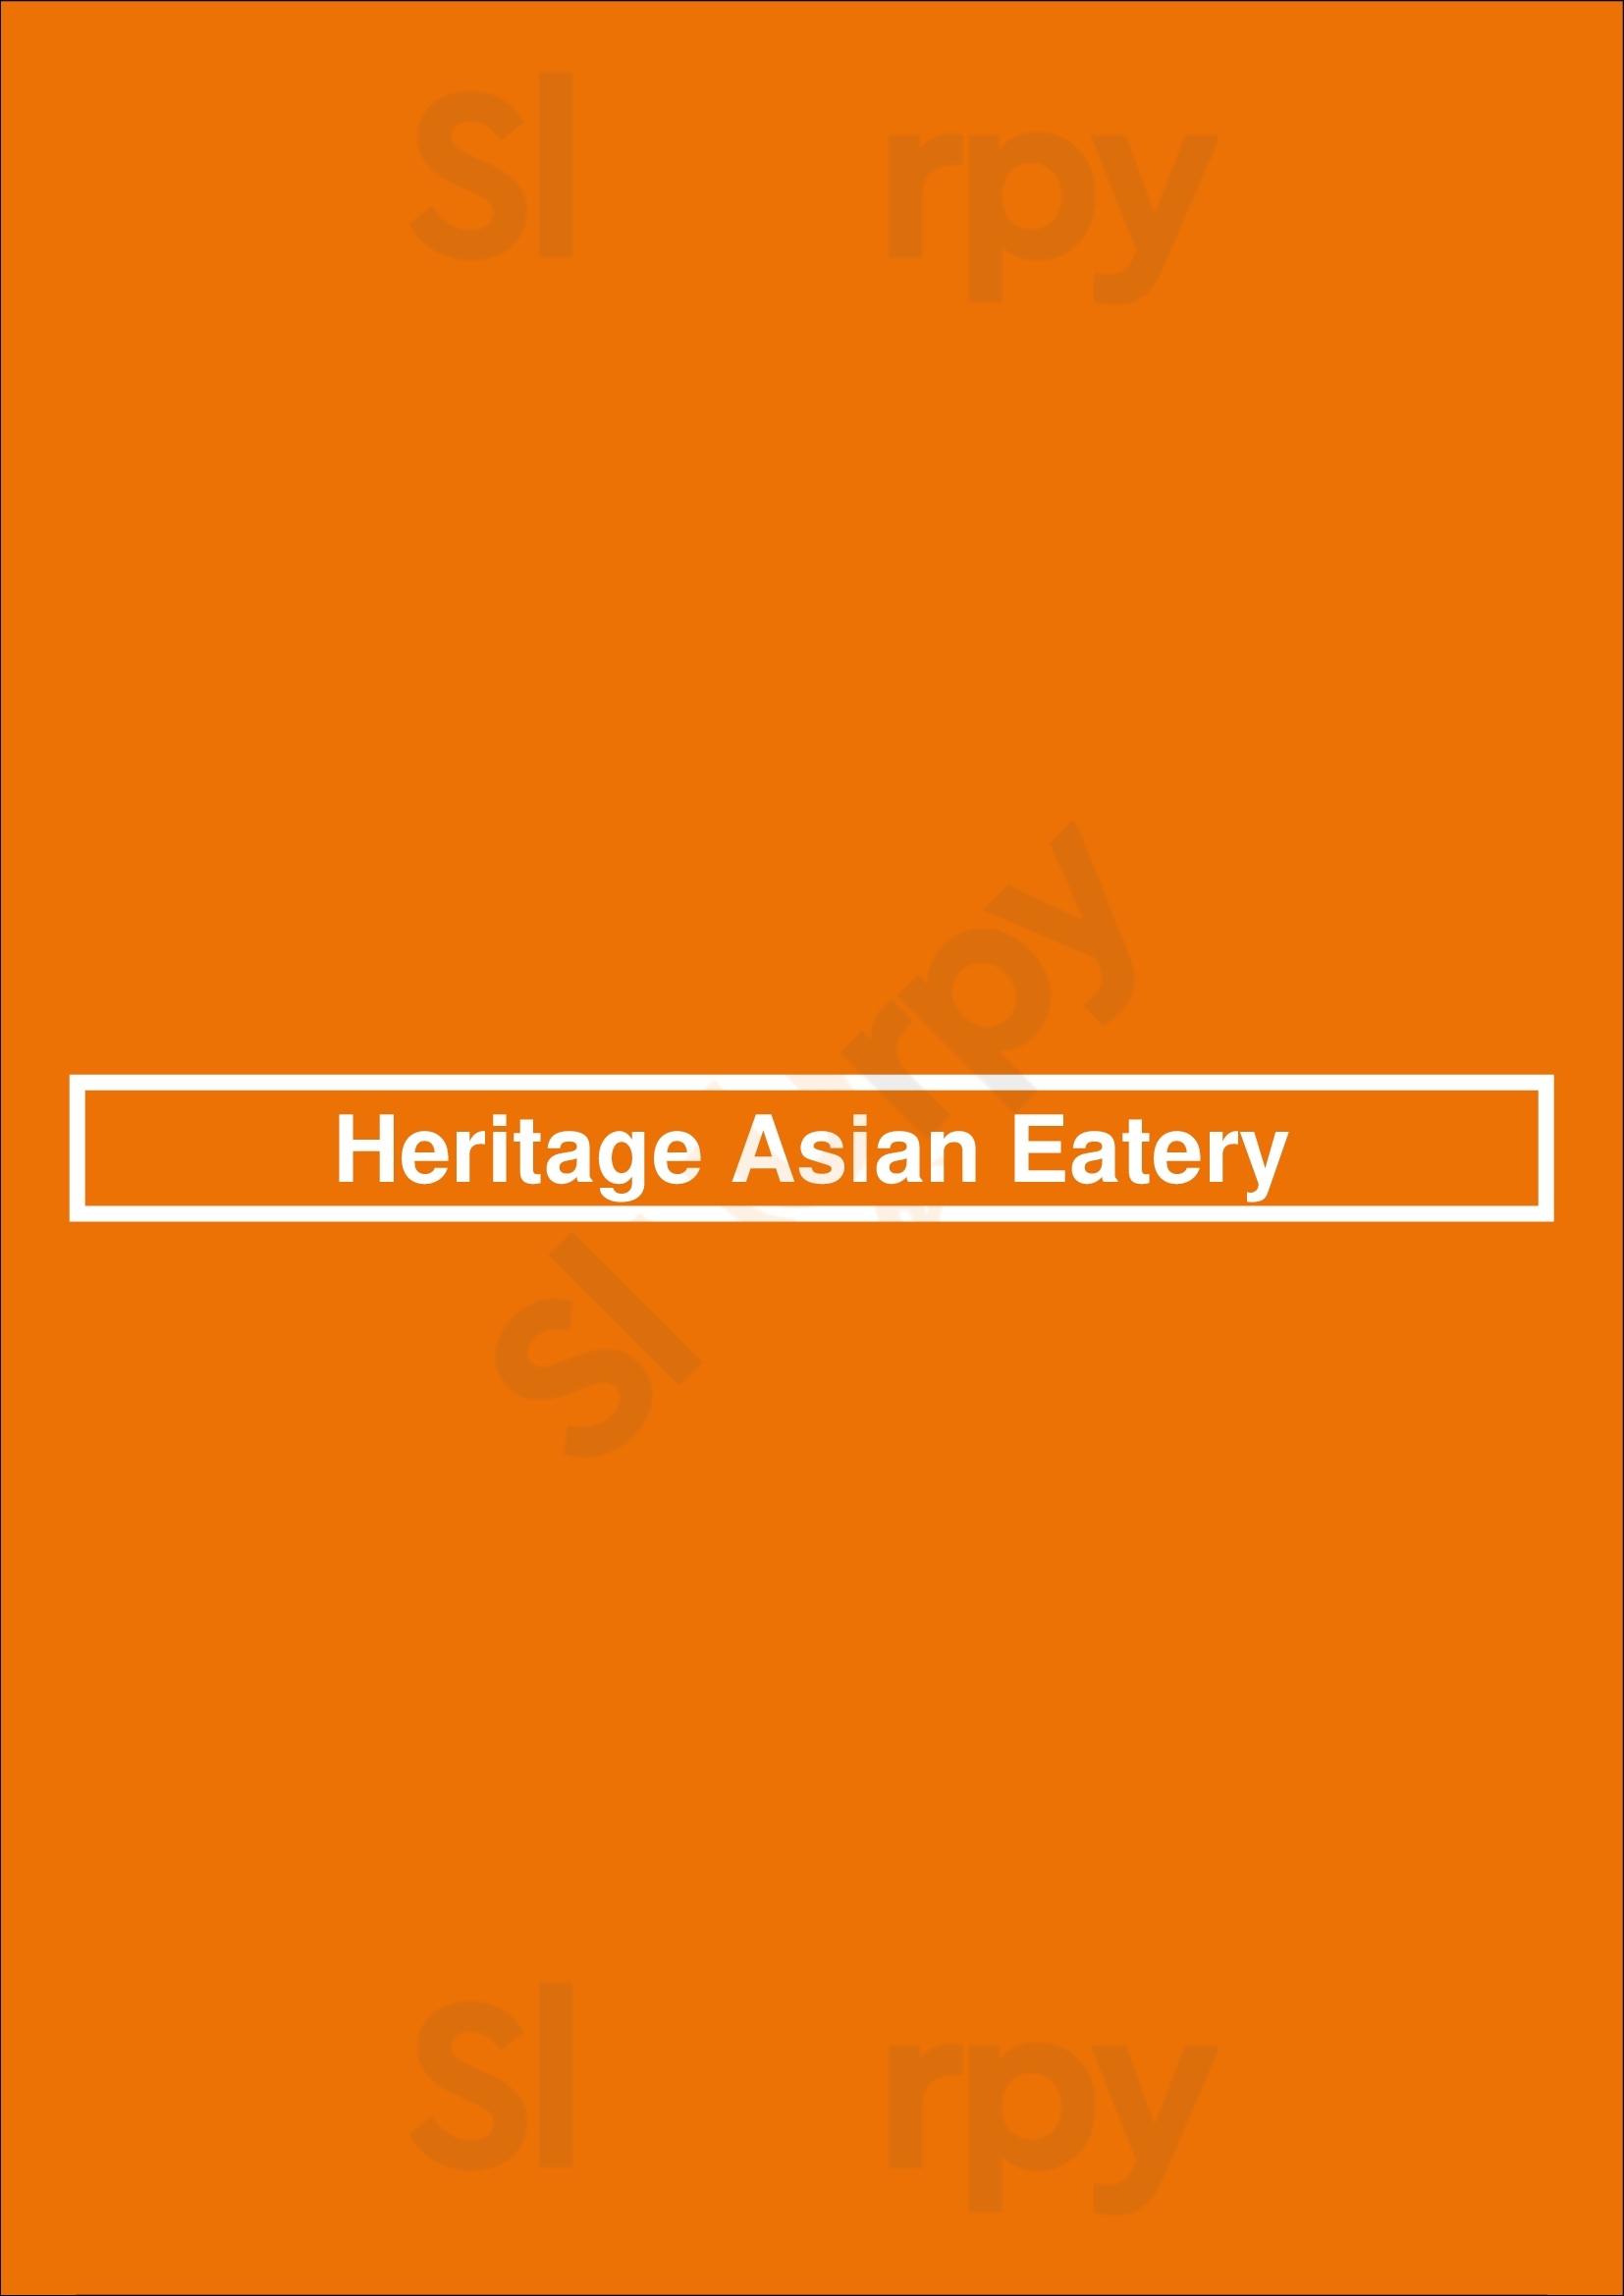 Heritage Asian Eatery Vancouver Menu - 1